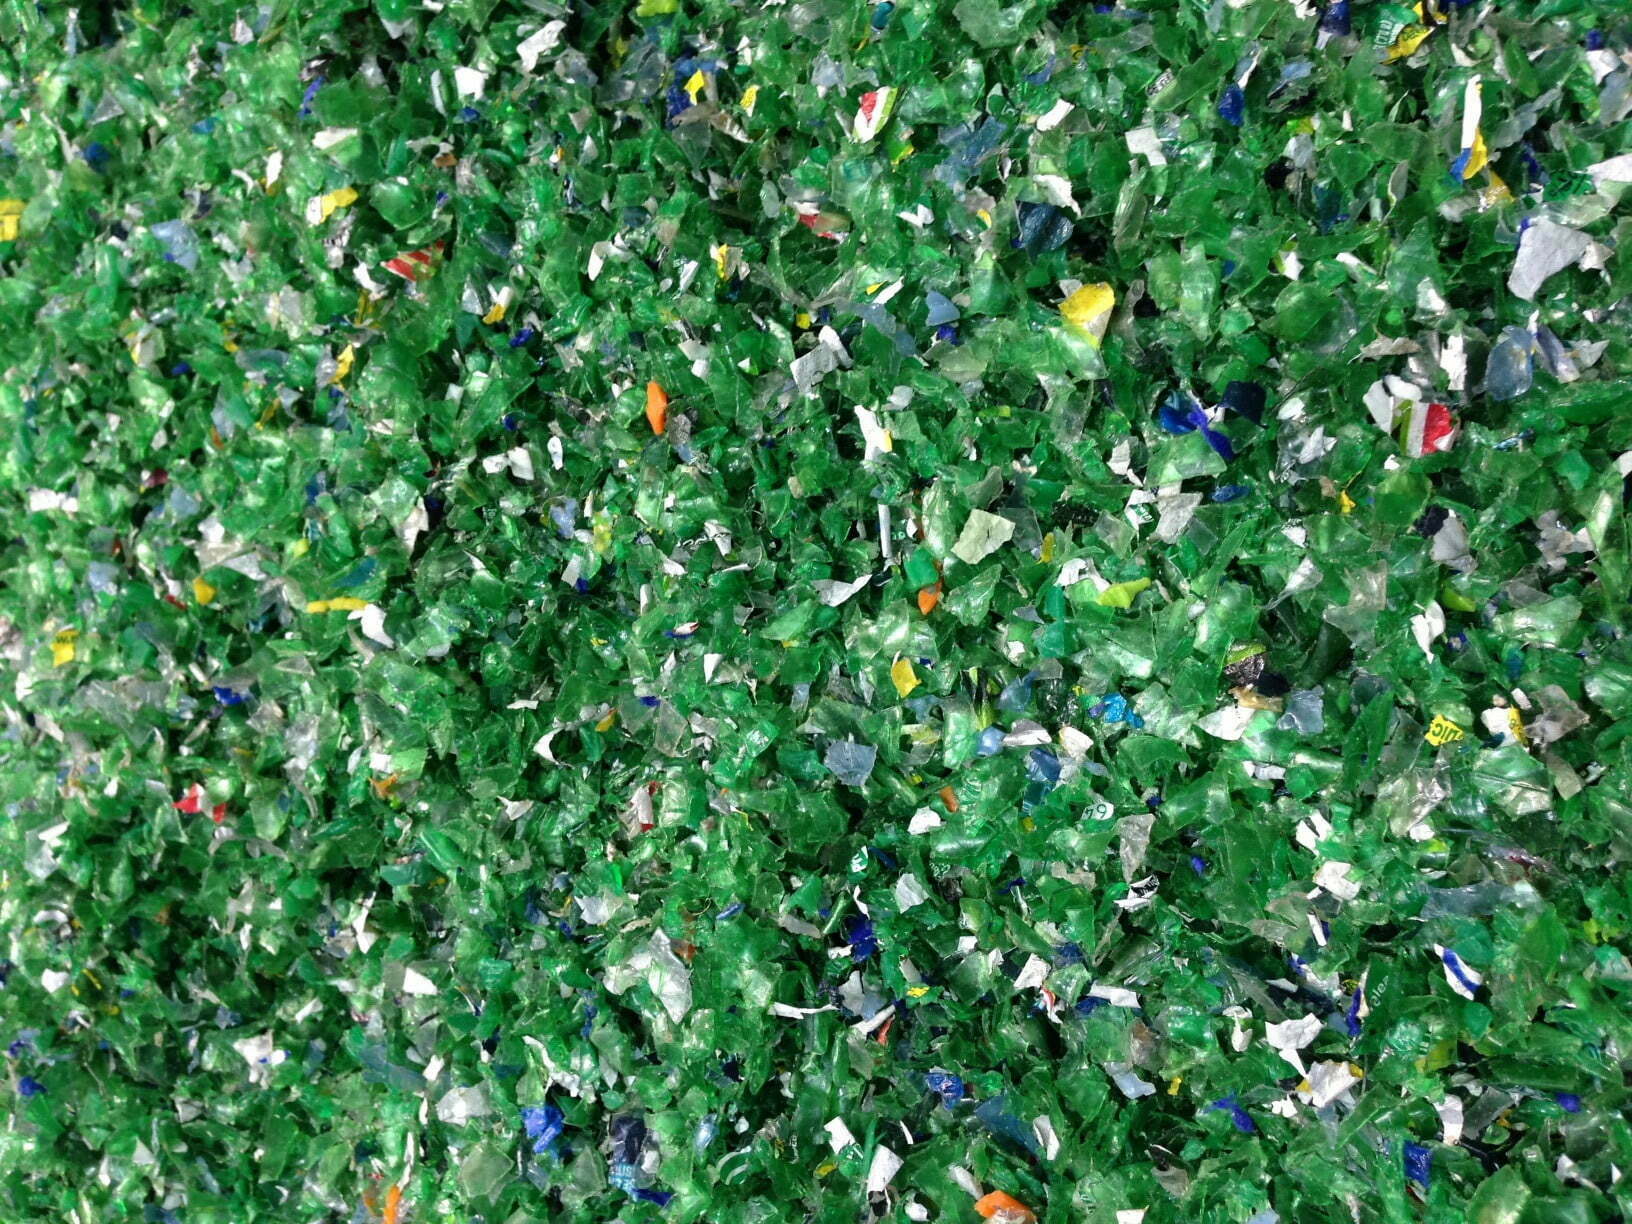 recycling center plastic pieces with labels from soda and other drink bottles earth day trash make t20 eORlem Here's How Carbon Dioxide Can be Used to Make Biodegradable Plastics